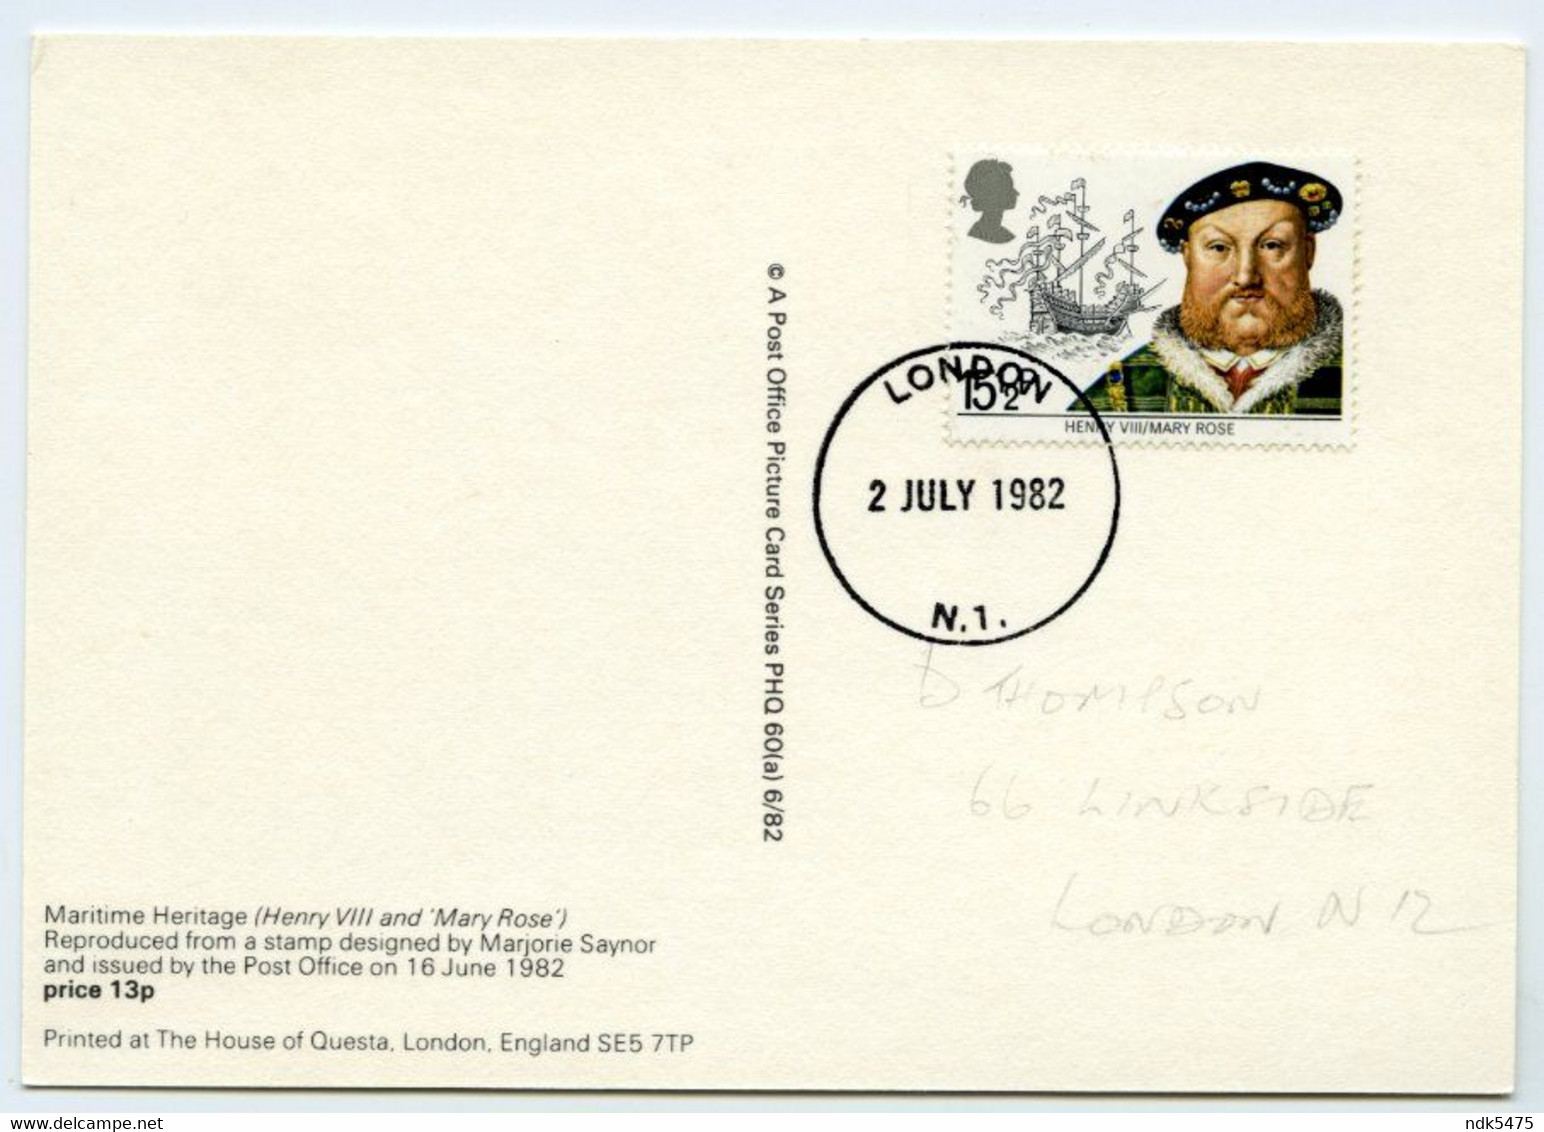 PHQ : MARITIME HERITAGE - HENRY VIII, MARY ROSE, 1982 : FIRST DAY OF ISSUE, LONDON N1 (10 X 15cms Approx.) - Cartes PHQ